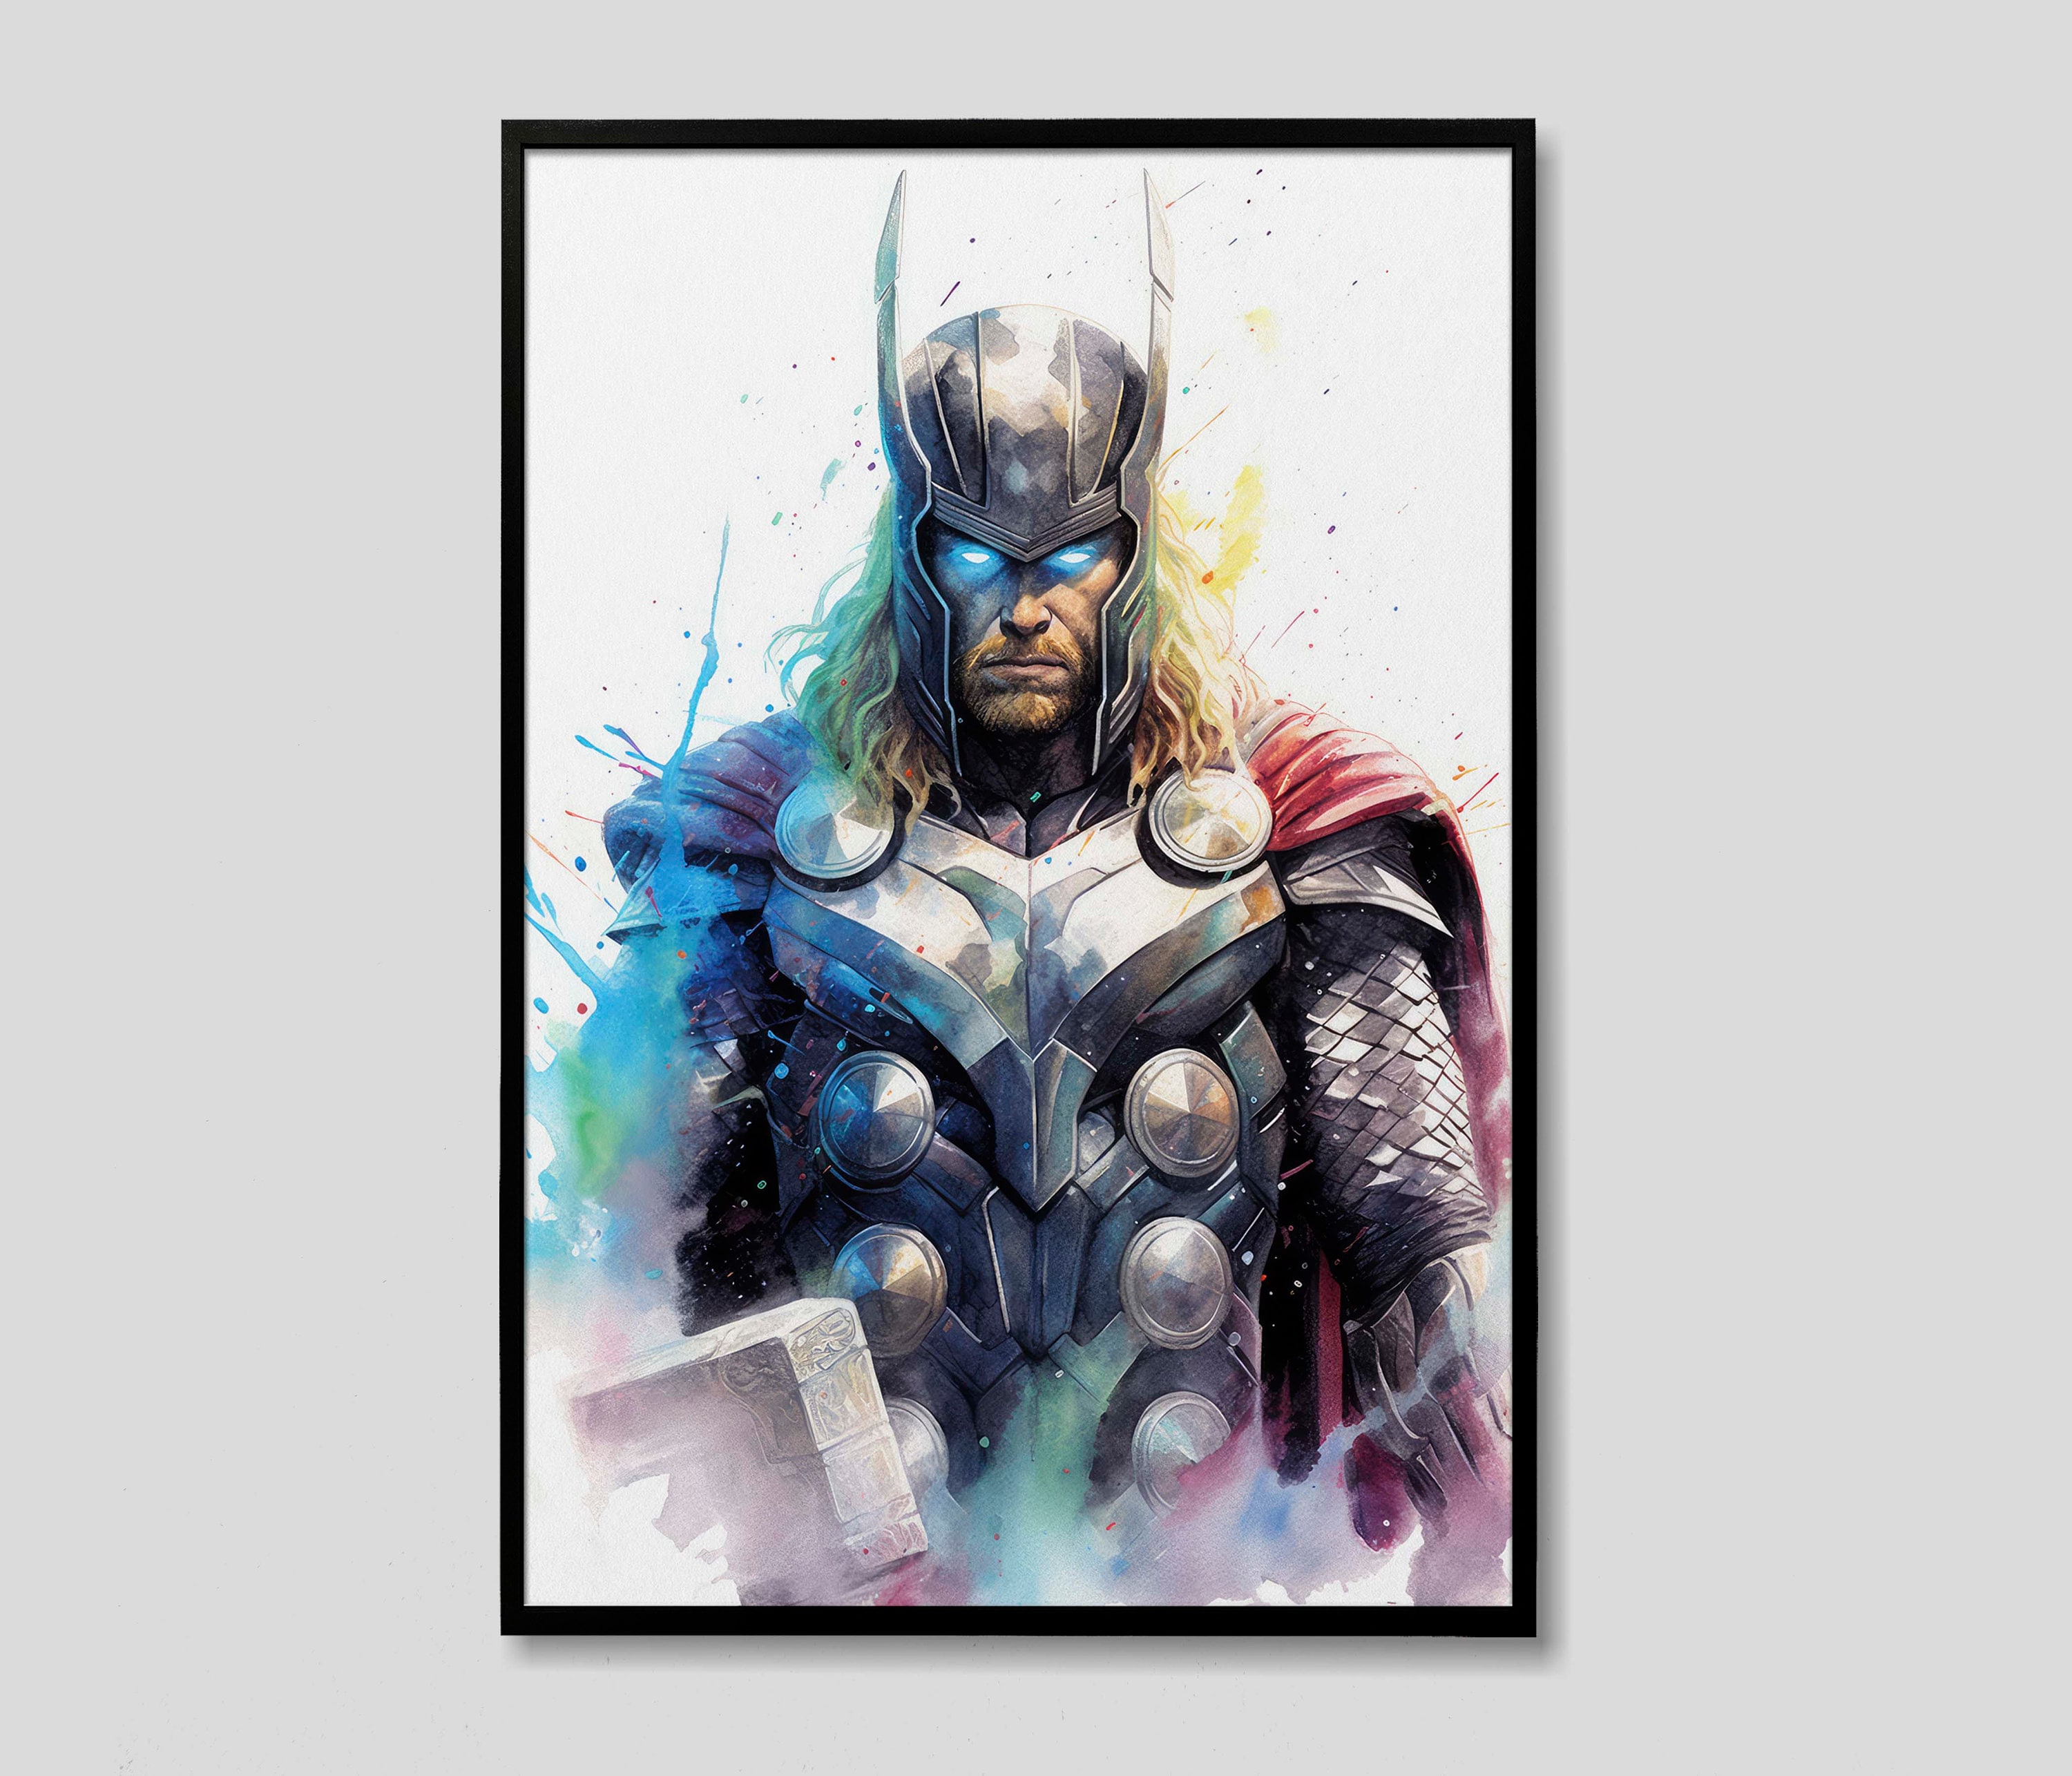 Marvel Thor: Love and Thunder - Thor Odinson One Sheet Wall Poster